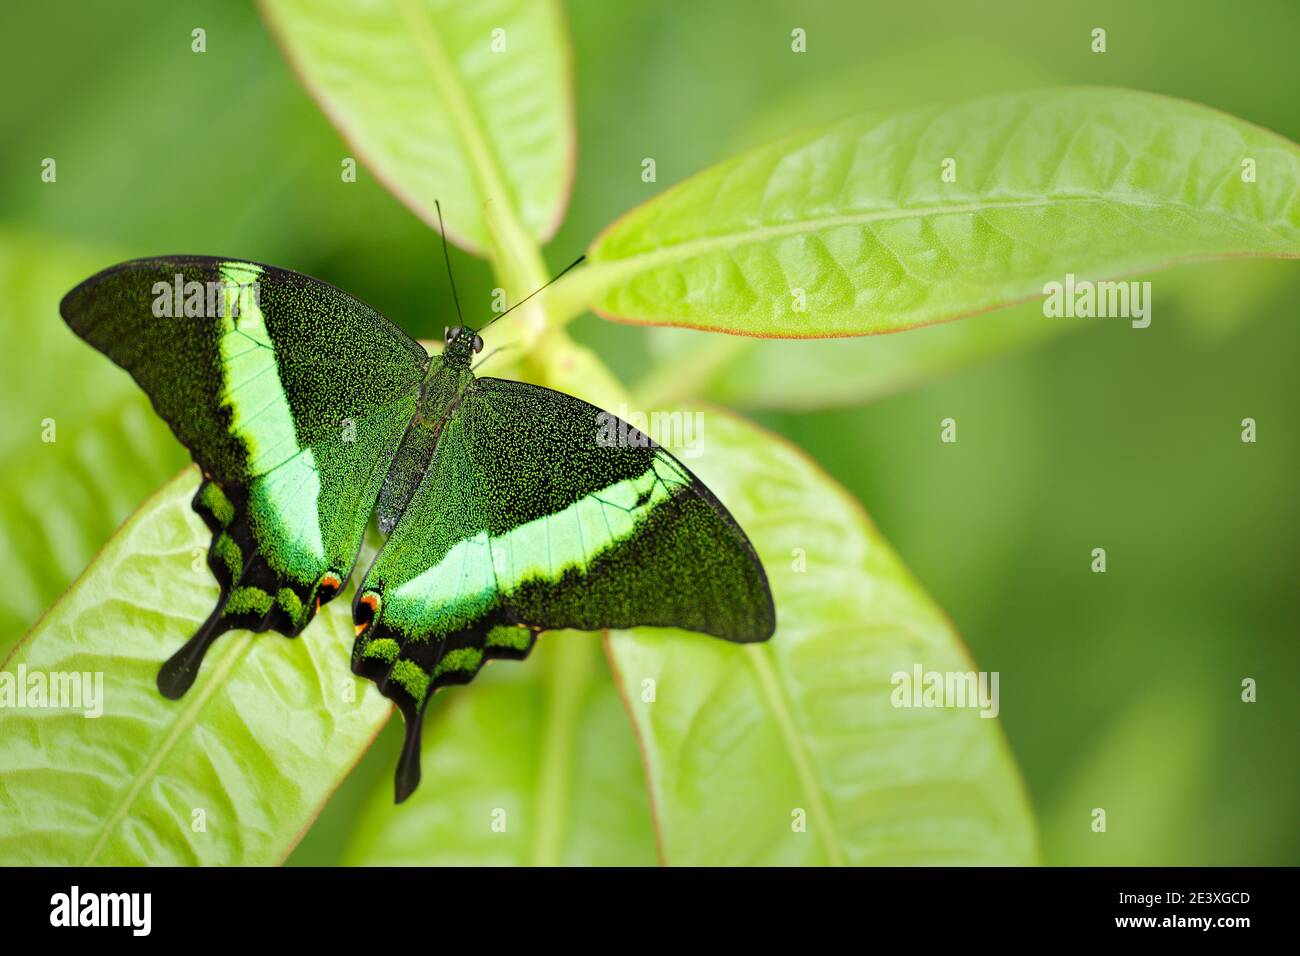 Papilio palinurus, Green emerald swallowtail butterfly. Insect in the ...